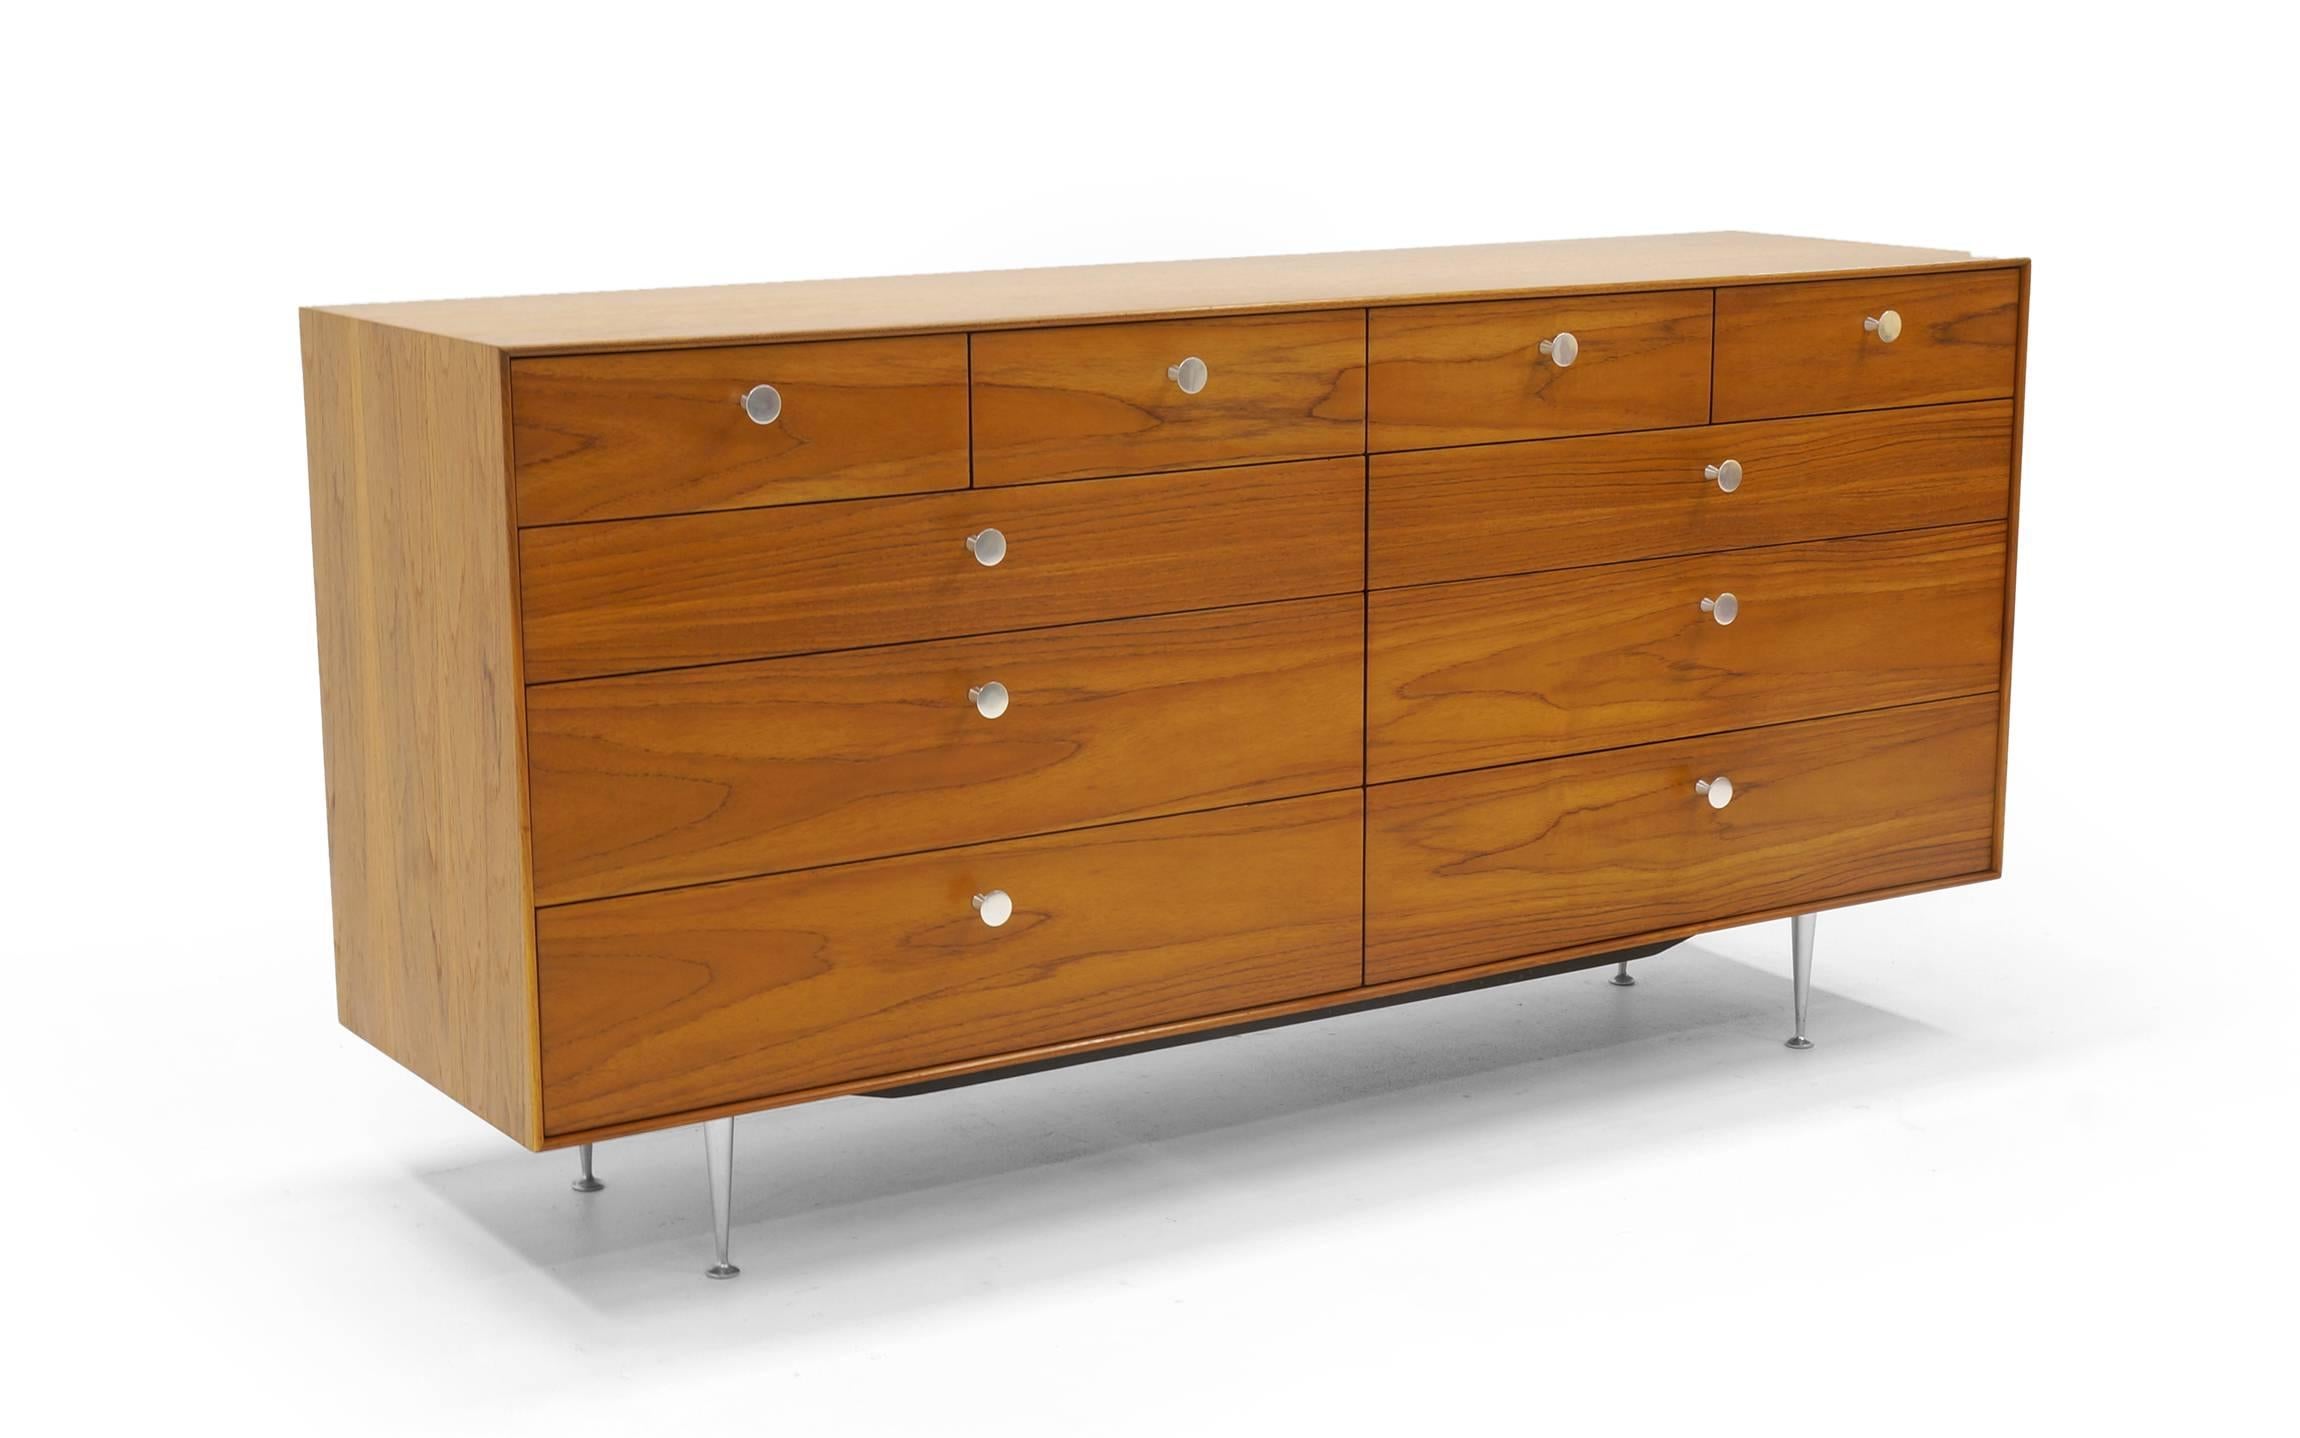 Exceptional and rare version of the George Nelson for Herman Miller thin edge cabinet for Herman Miller. Walnut case with cast aluminium pulls and legs. Ten drawers. Expertly and thoughtfully restored and refinished.